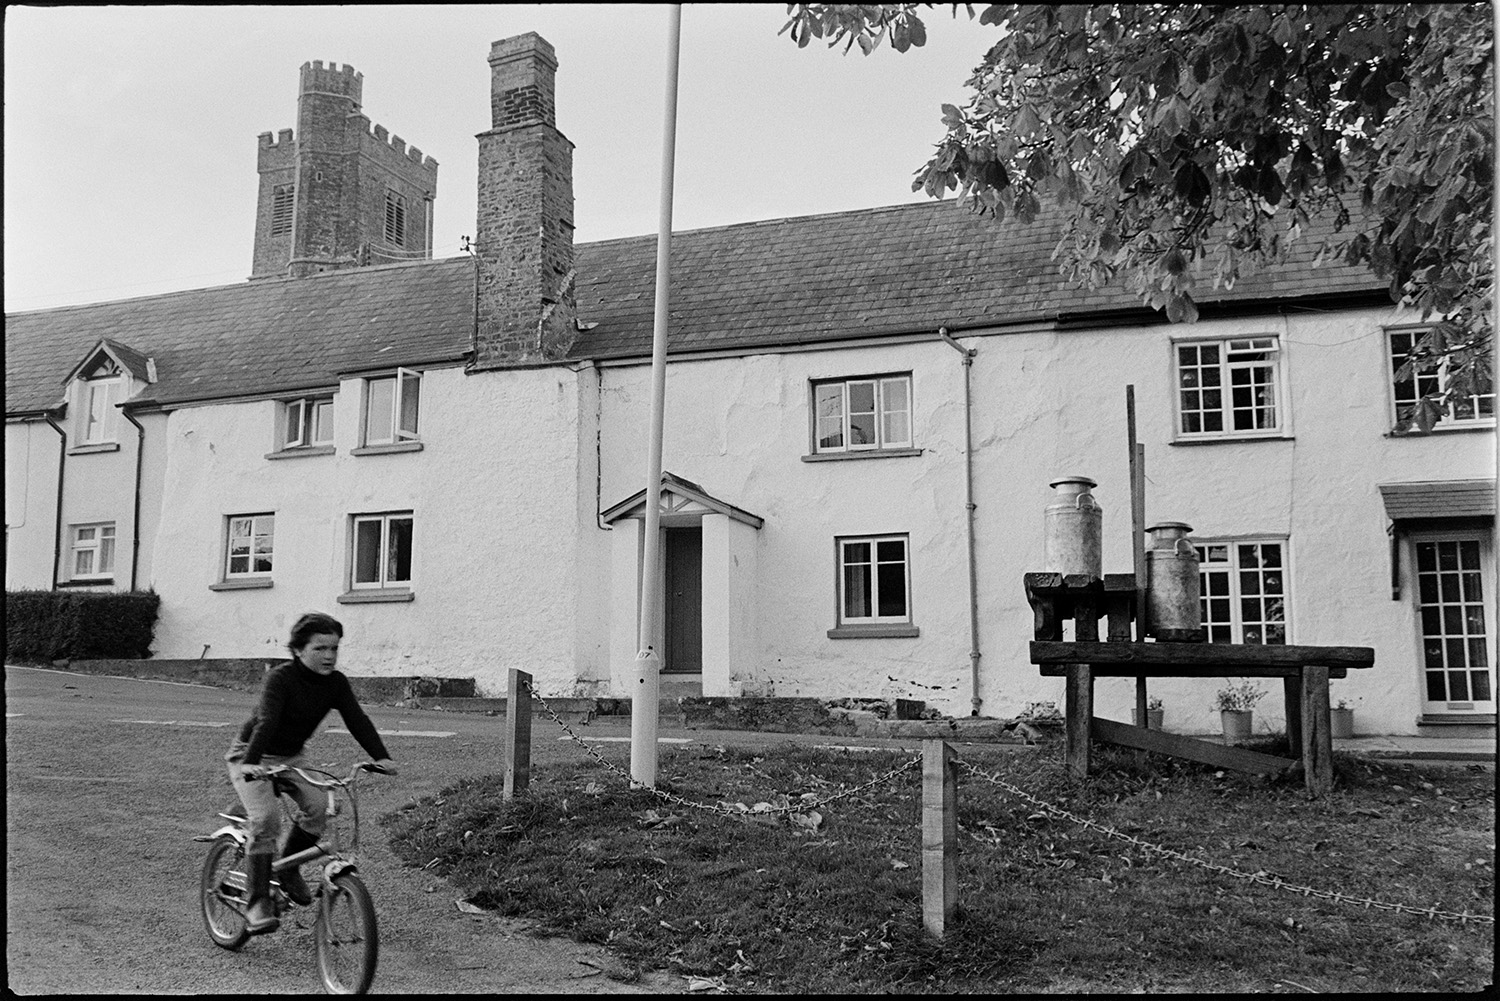 Village square, milk churns on stand. 
[A child riding a bicycle past a wooden milk churn stand with milk churns on it waiting to be collected, in Atherington. Terraced houses are visible in the background.]